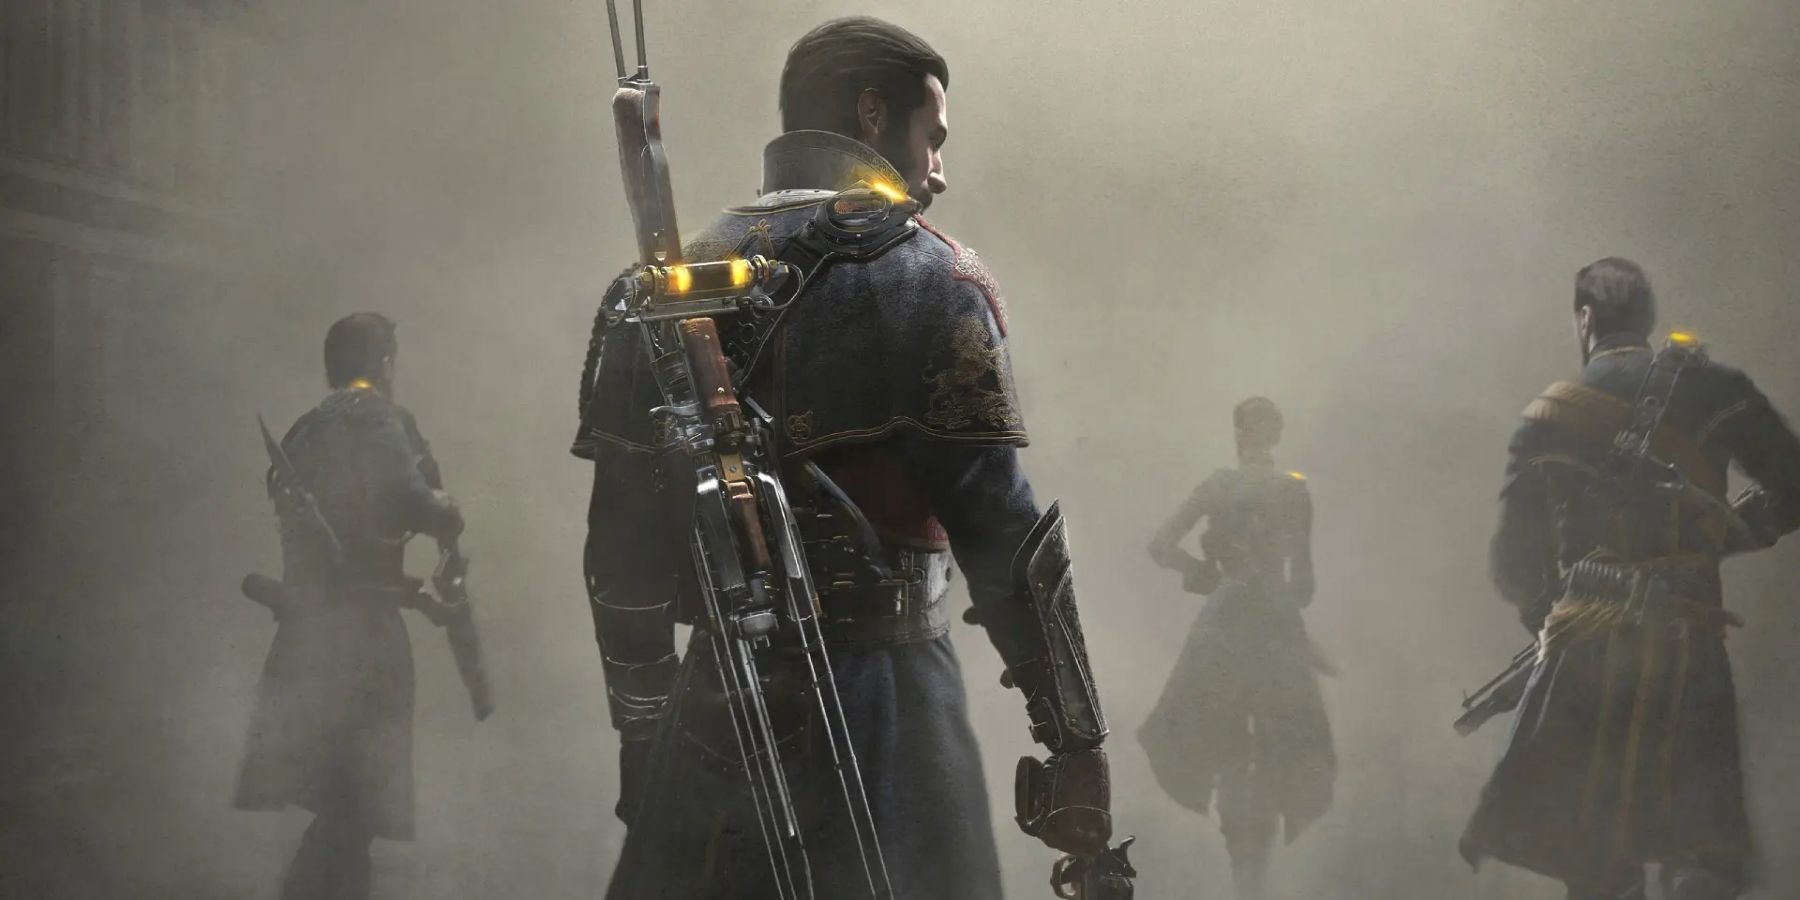 Gameplay from The Order 1886 